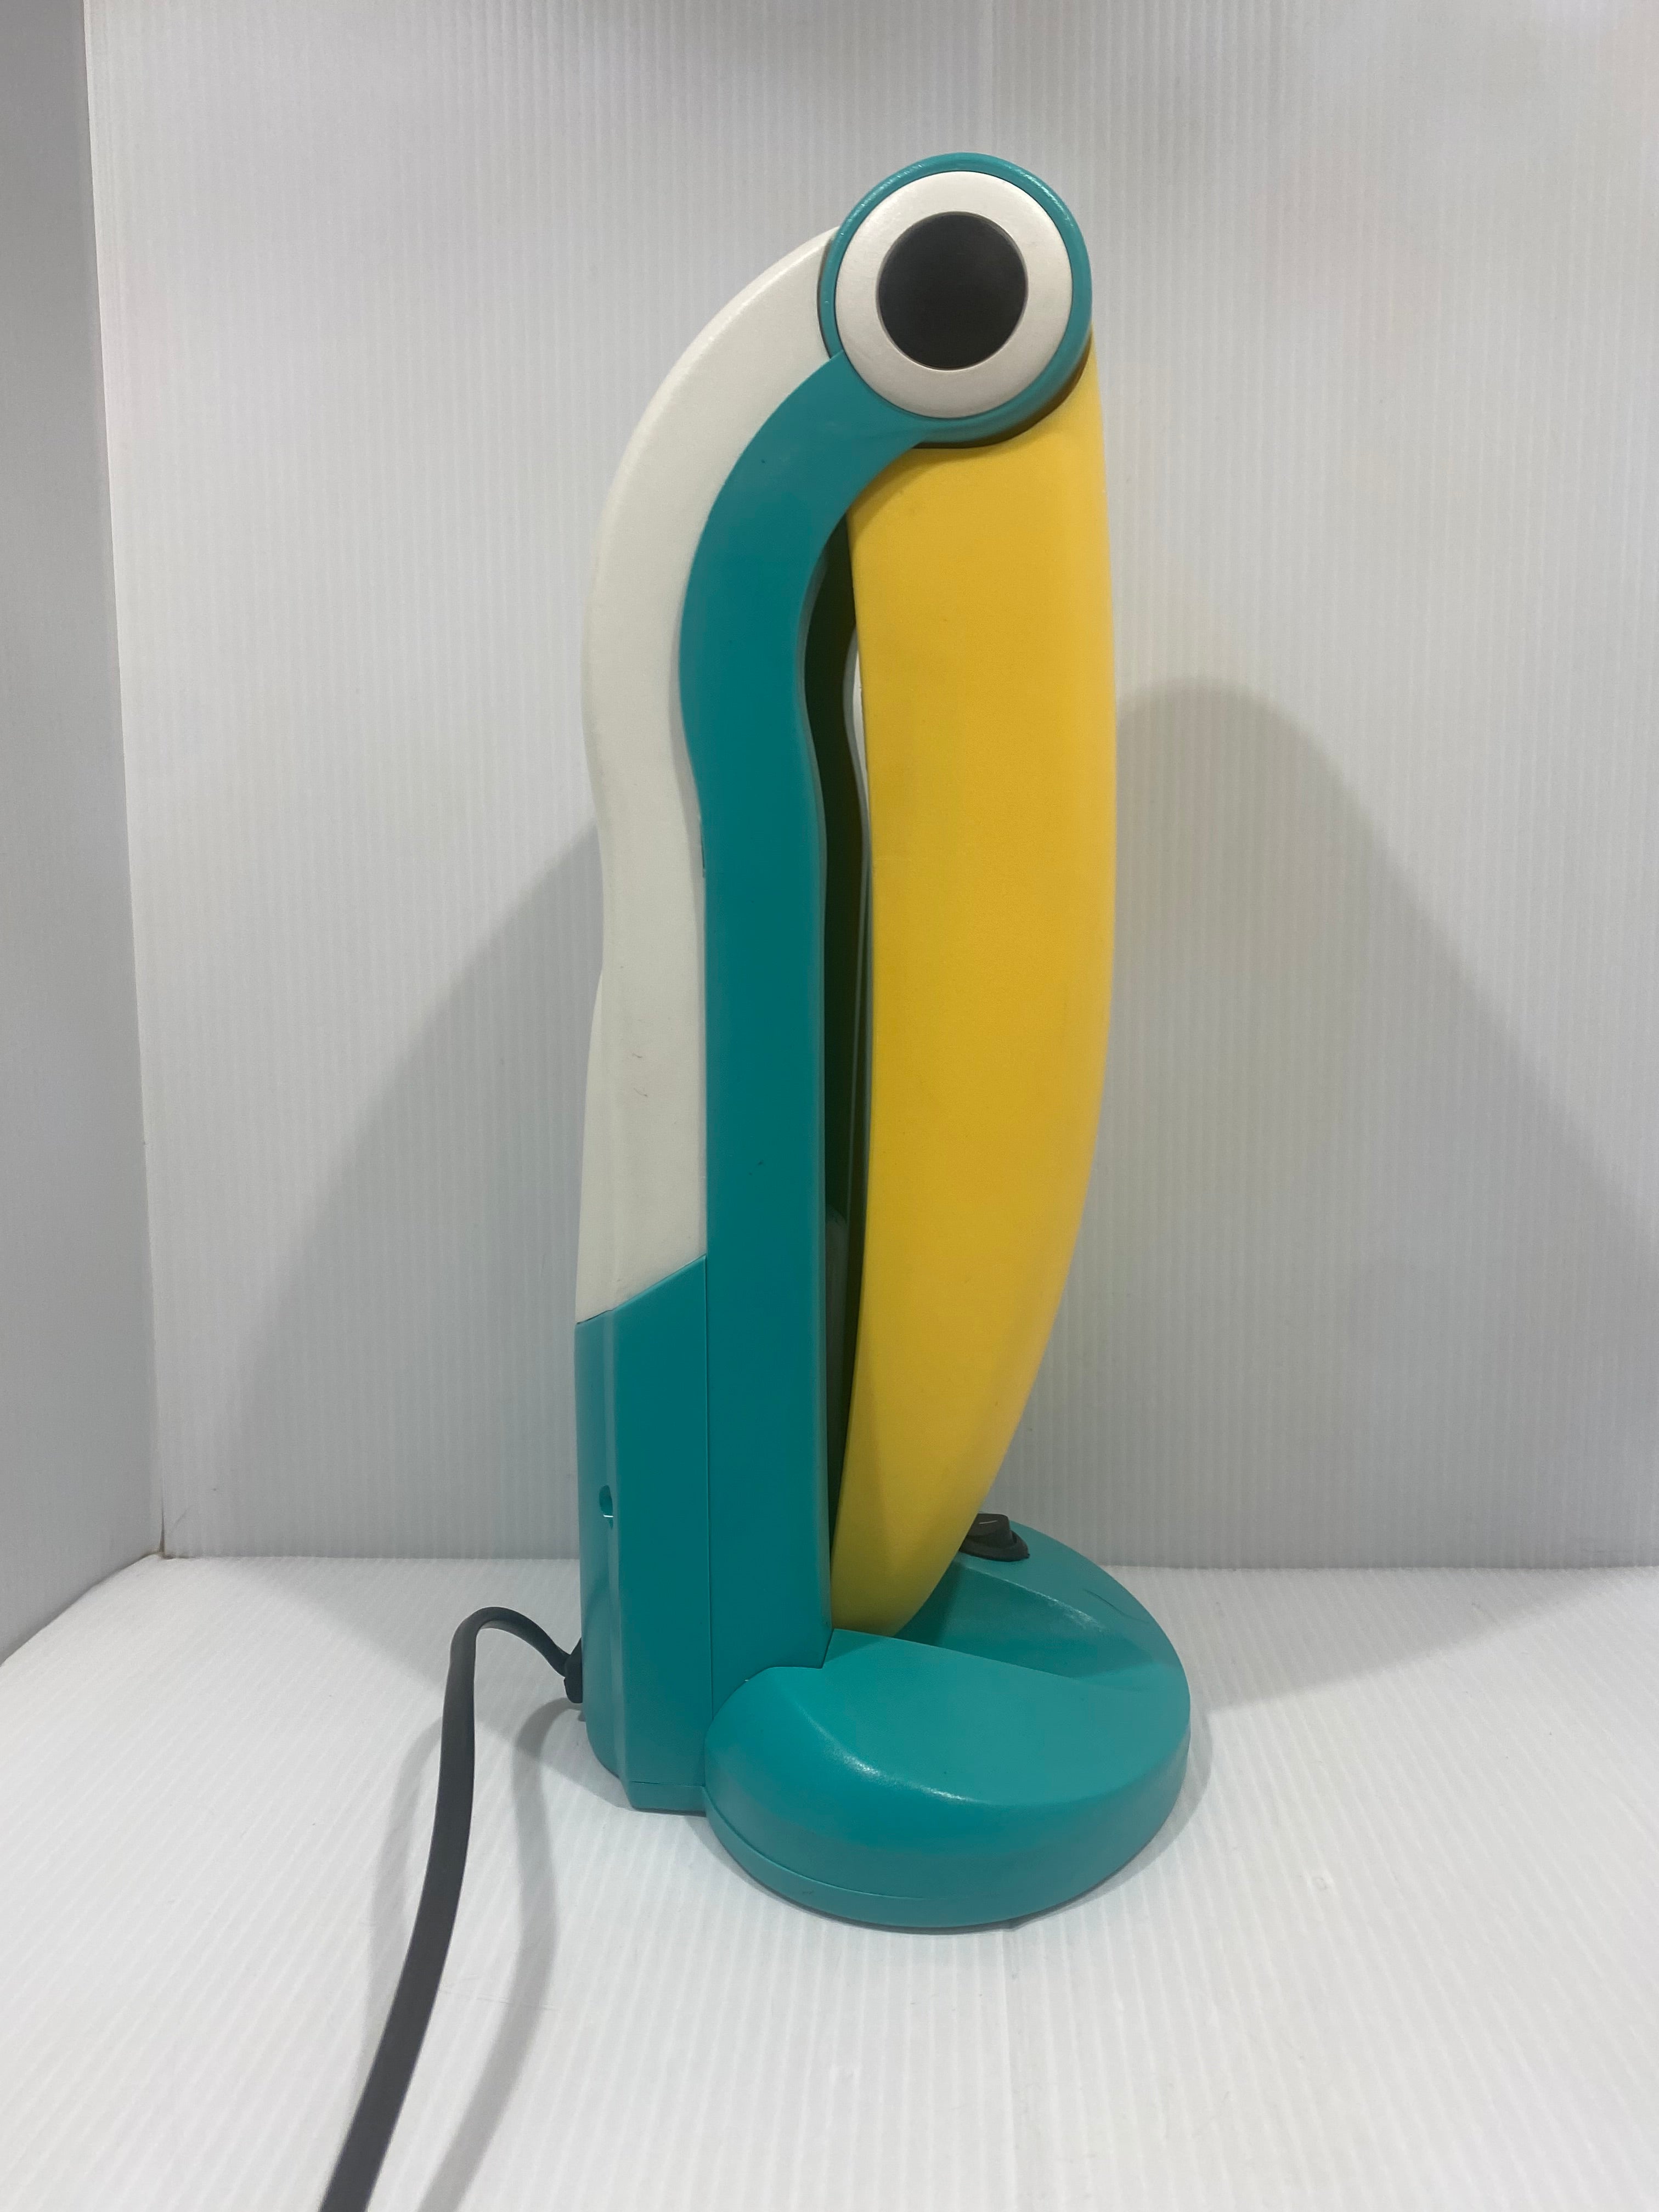 Funny and beautiful Toucan lamp, designed by H.T. Huang in the 80s.